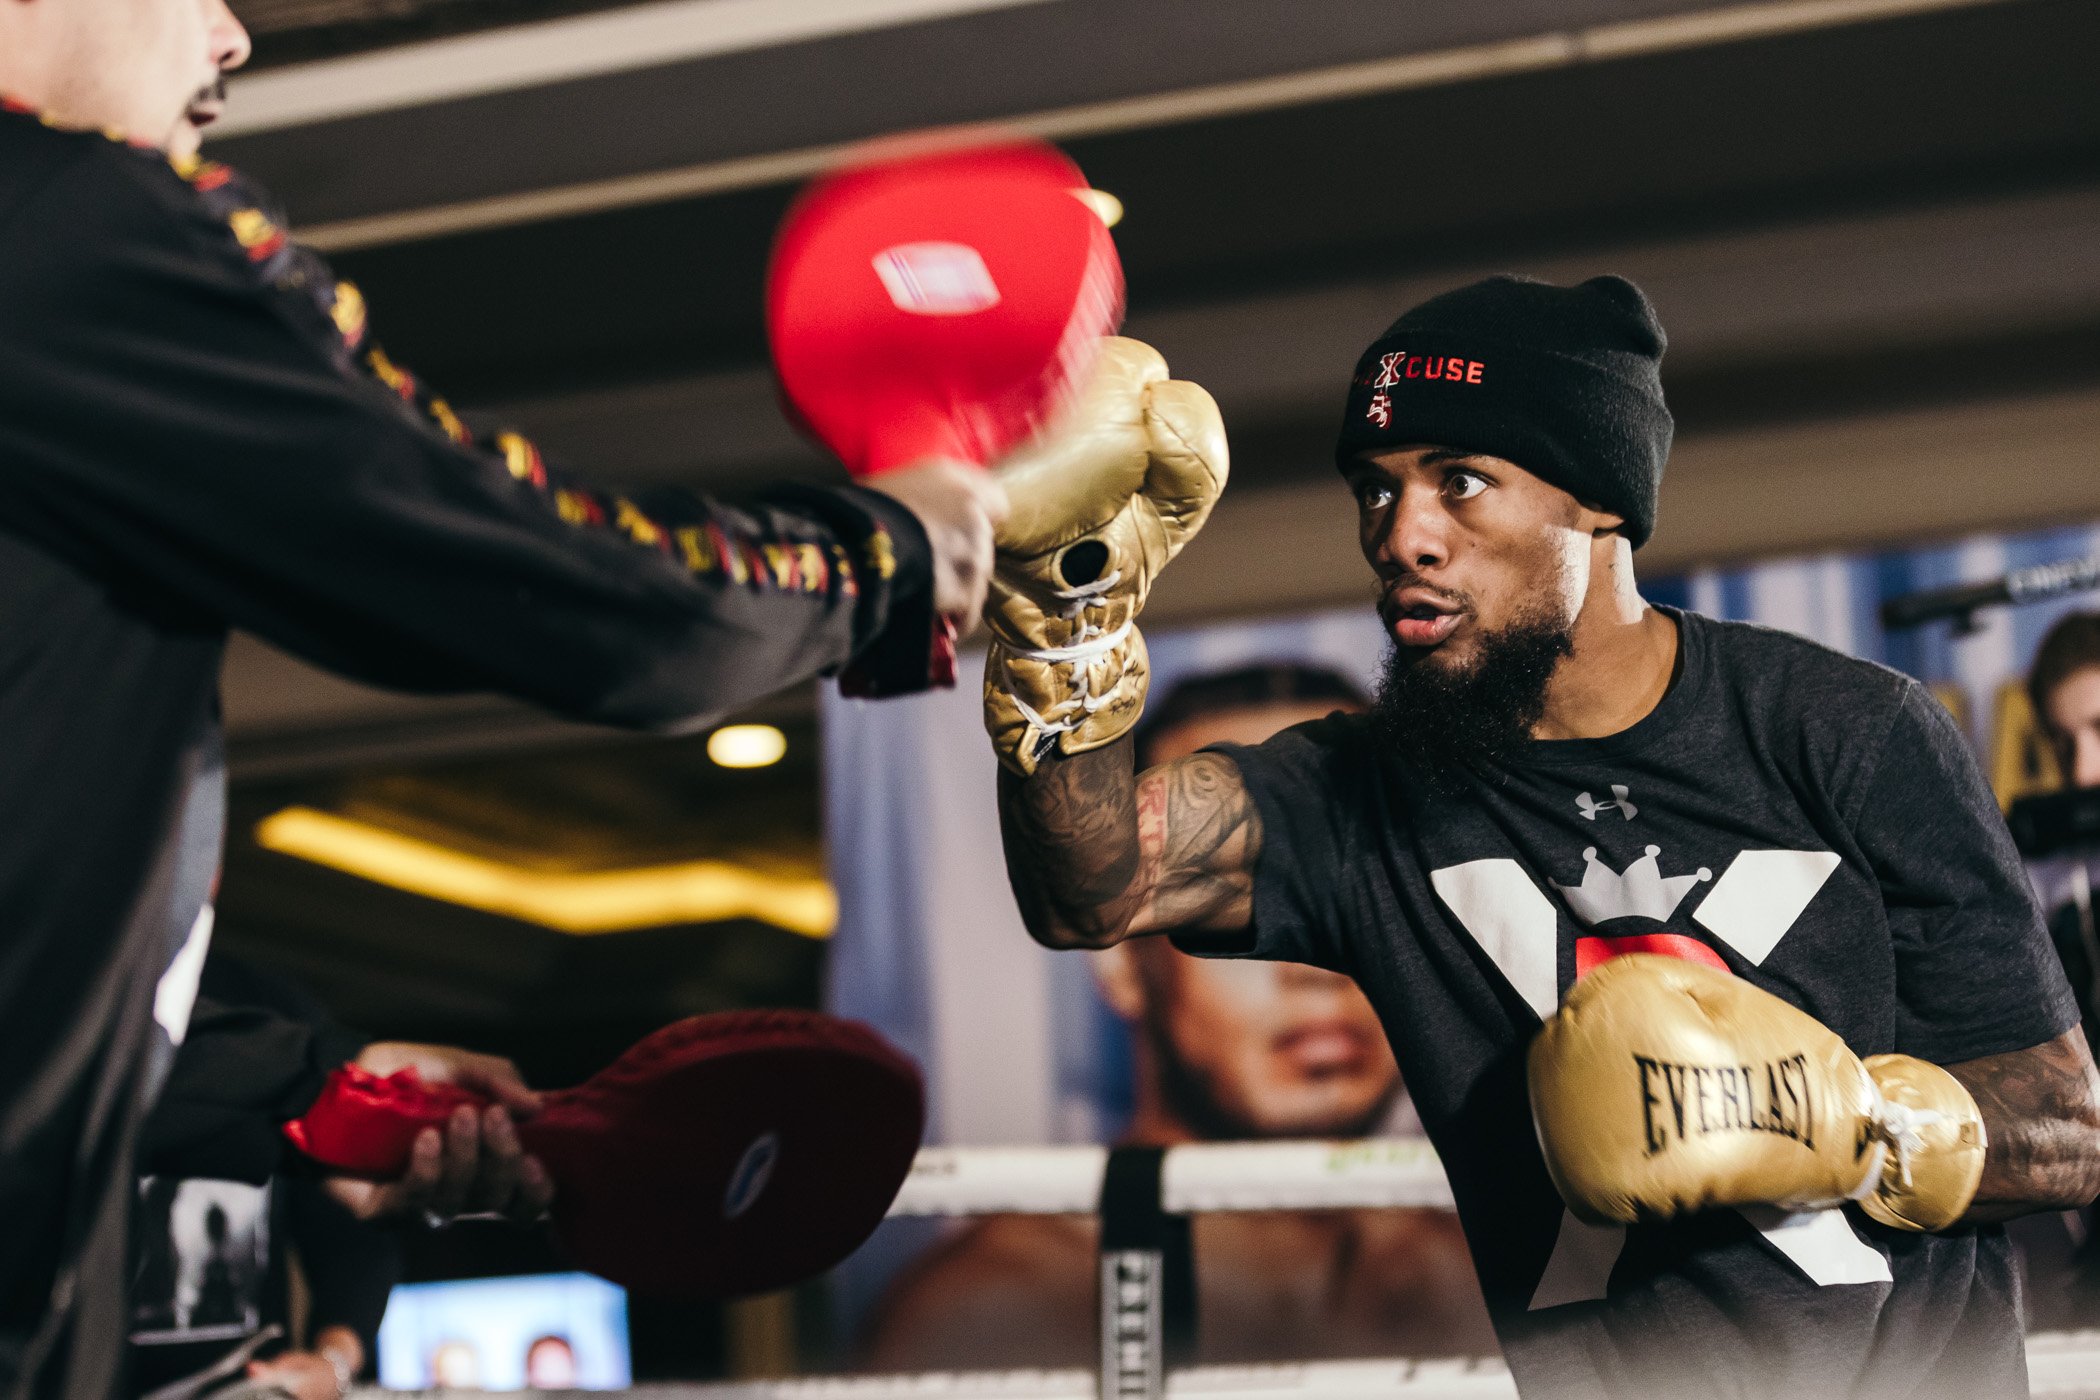 Lamont Roach Jr. fulfills 7-year promise with hometown title defense